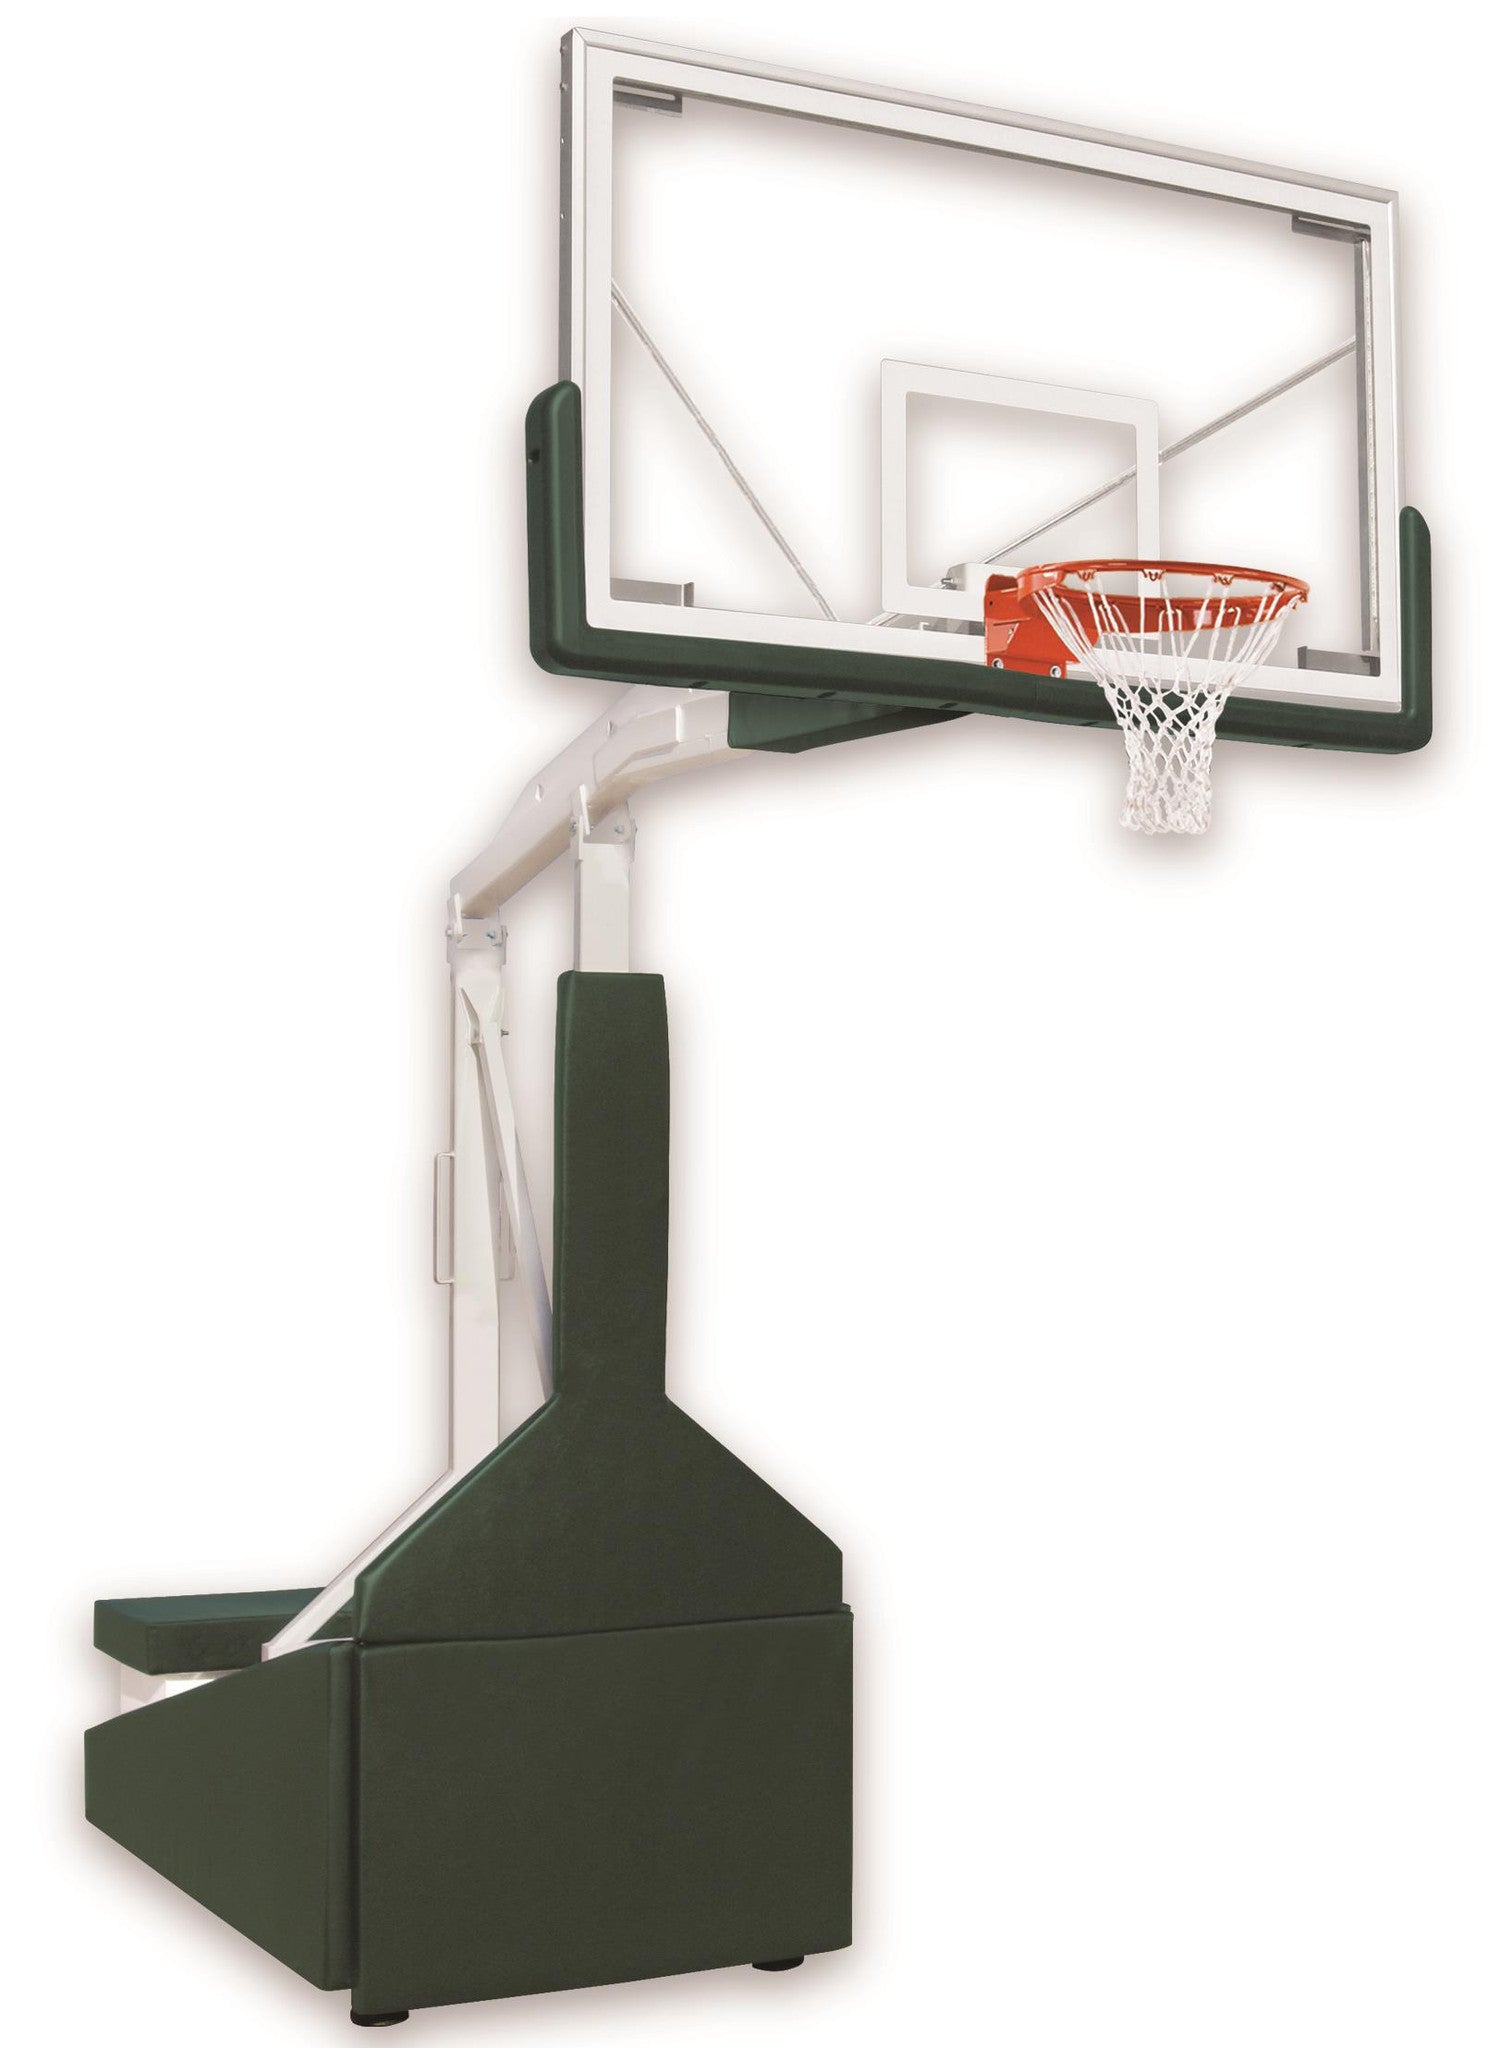 First Team Tempest Triumph FL Portable Adjustable Basketball Hoop 72 inch Tempered Glass for Floating Floors